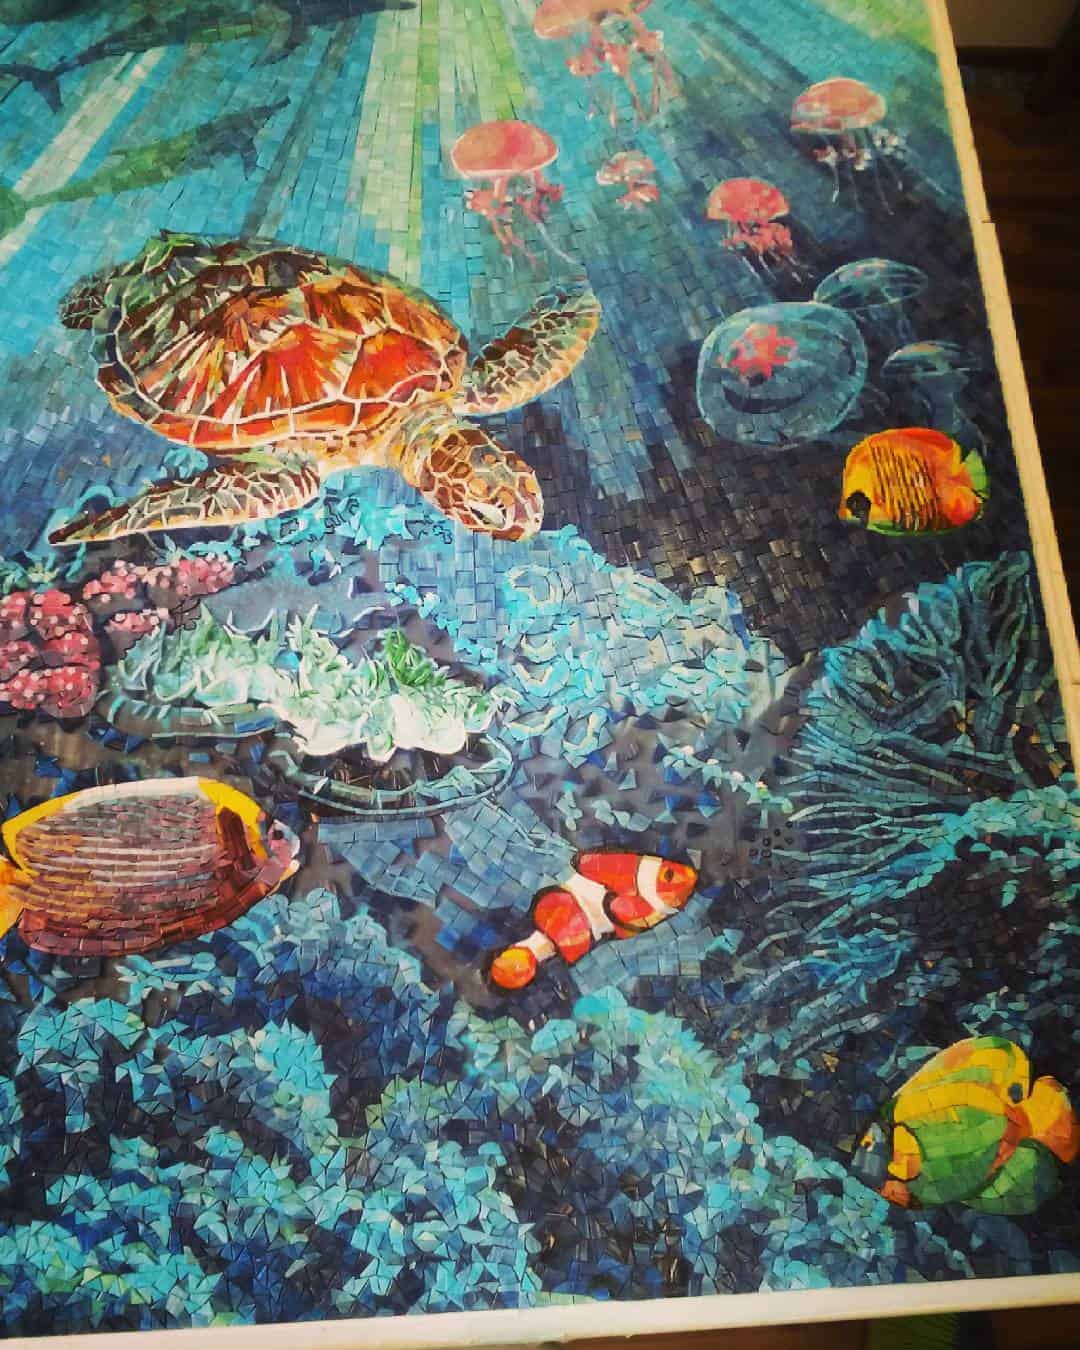 A colorful underwater scene depicted in a mosaic style, featuring a sea turtle, various fish, and coral reefs

